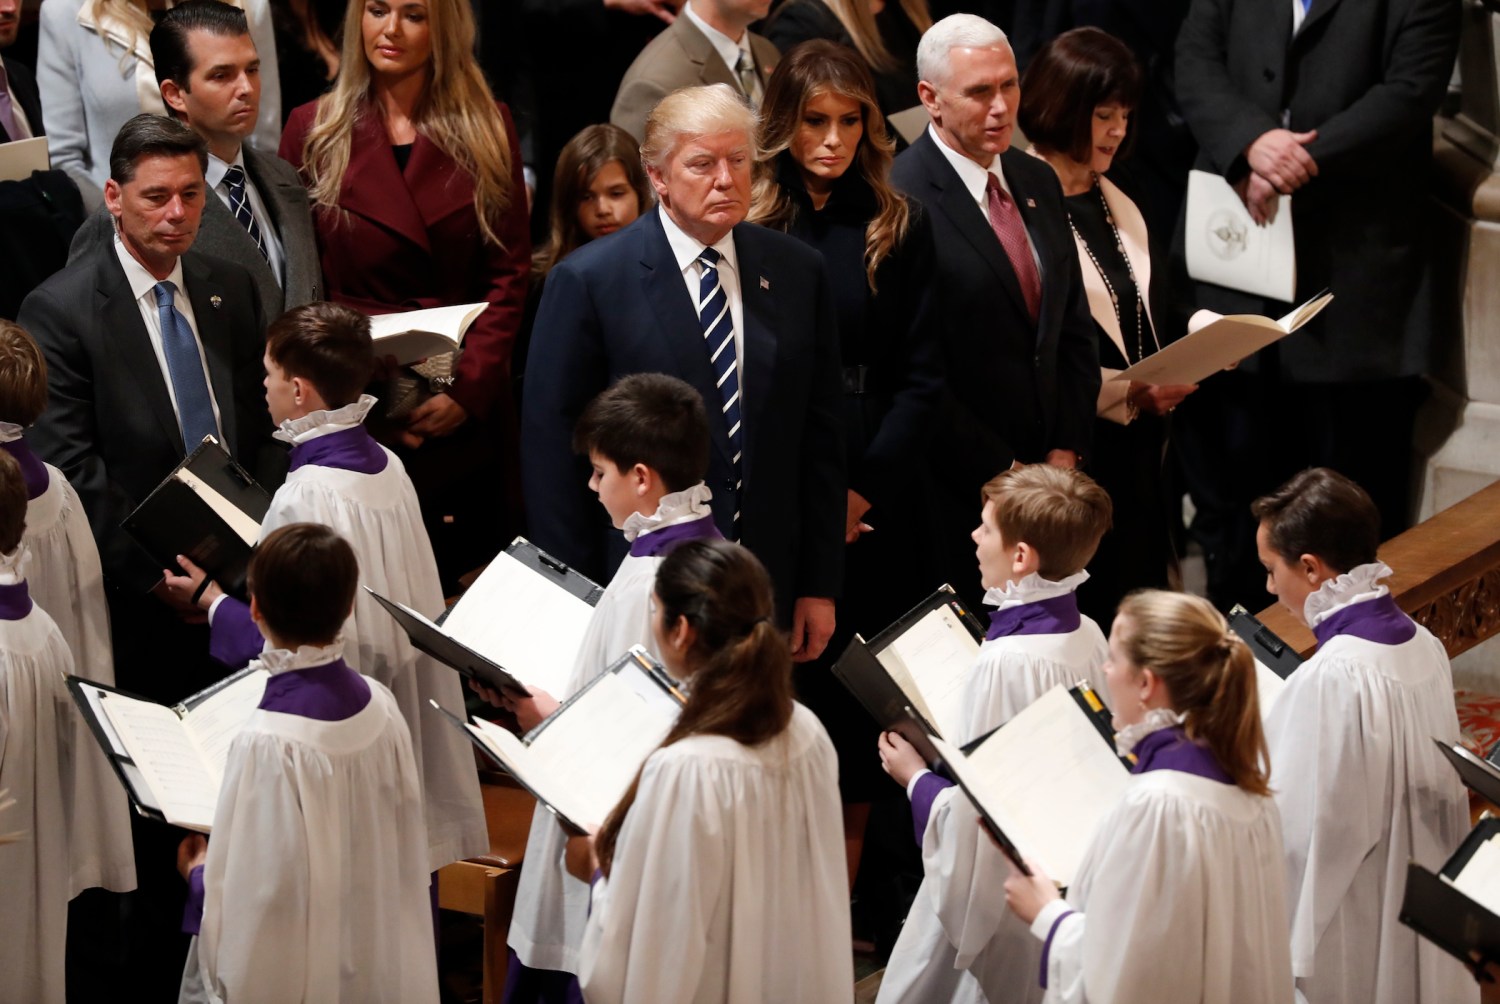 U.S. President Donald Trump (C) watches acolytes pass by as he is accompanied by his wife Melania, Vice President Mike Pence and his wife Karen (R), during a prayer service at Washington National Cathedral the morning after his inauguration, in Washington, U.S., January 21, 2017. REUTERS/Carlos Barria - RTSWPKT